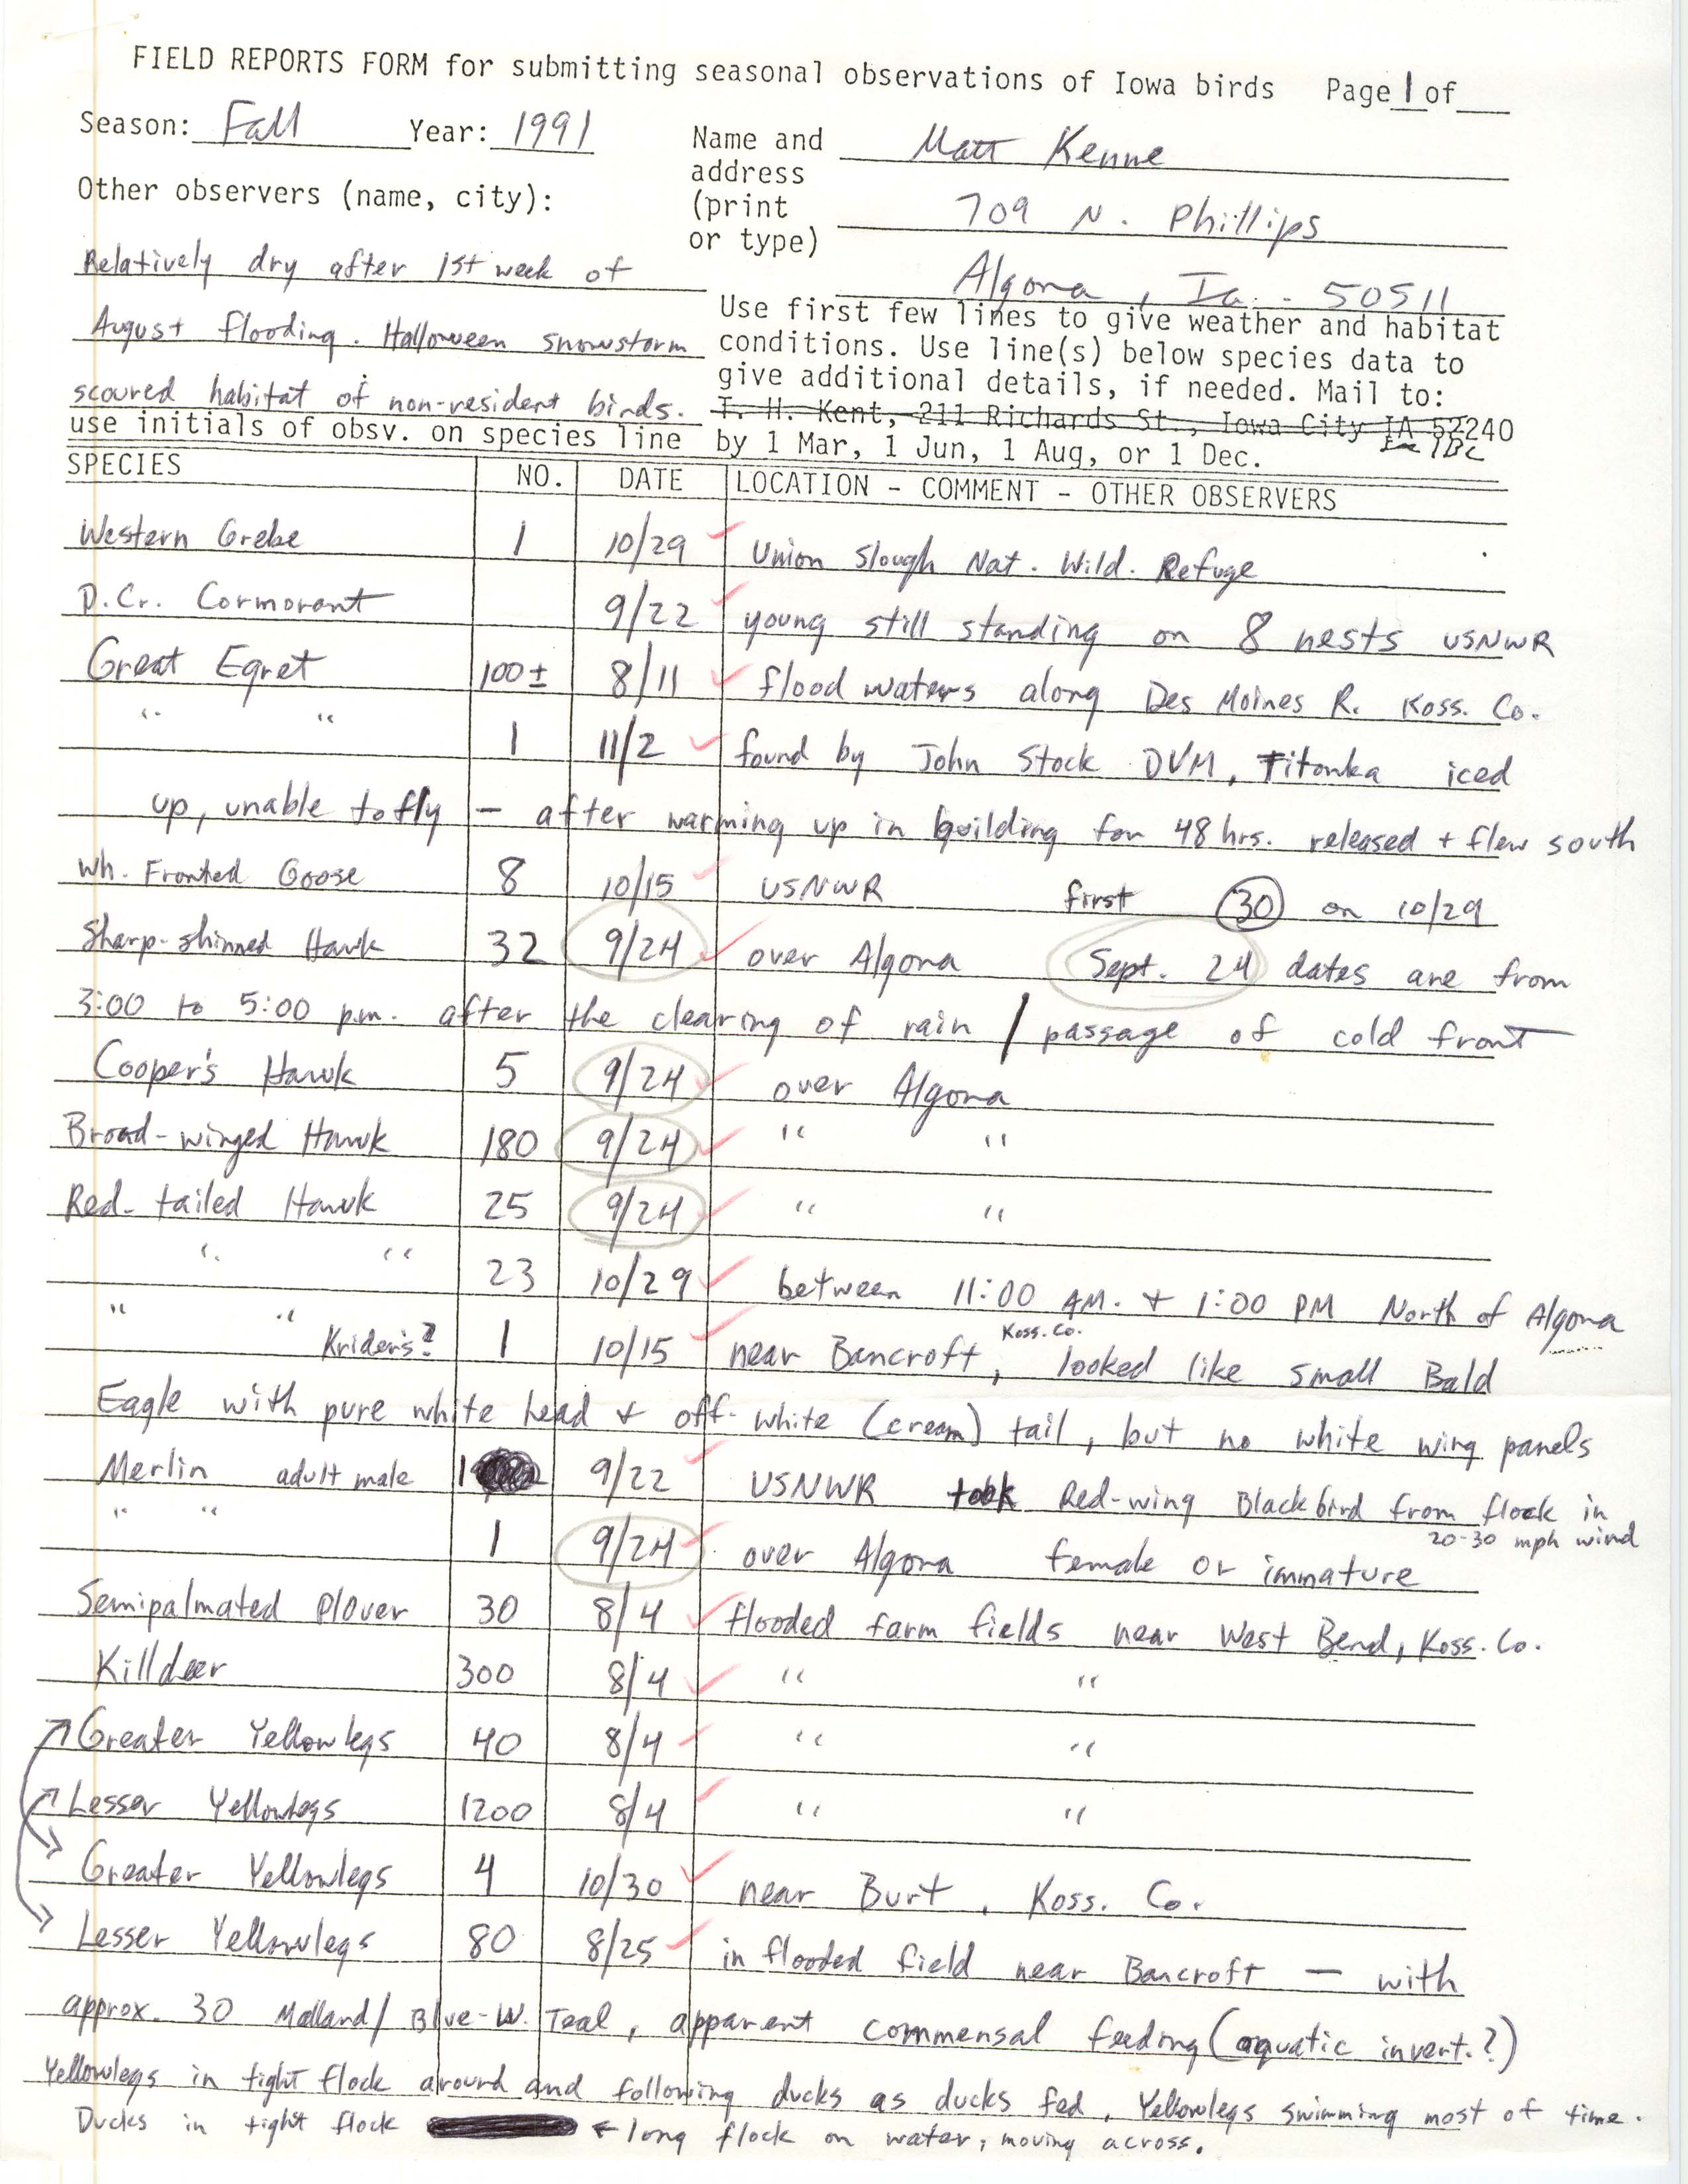 Field reports form for submitting seasonal observations of Iowa birds, Matthew Kenne, fall 1991